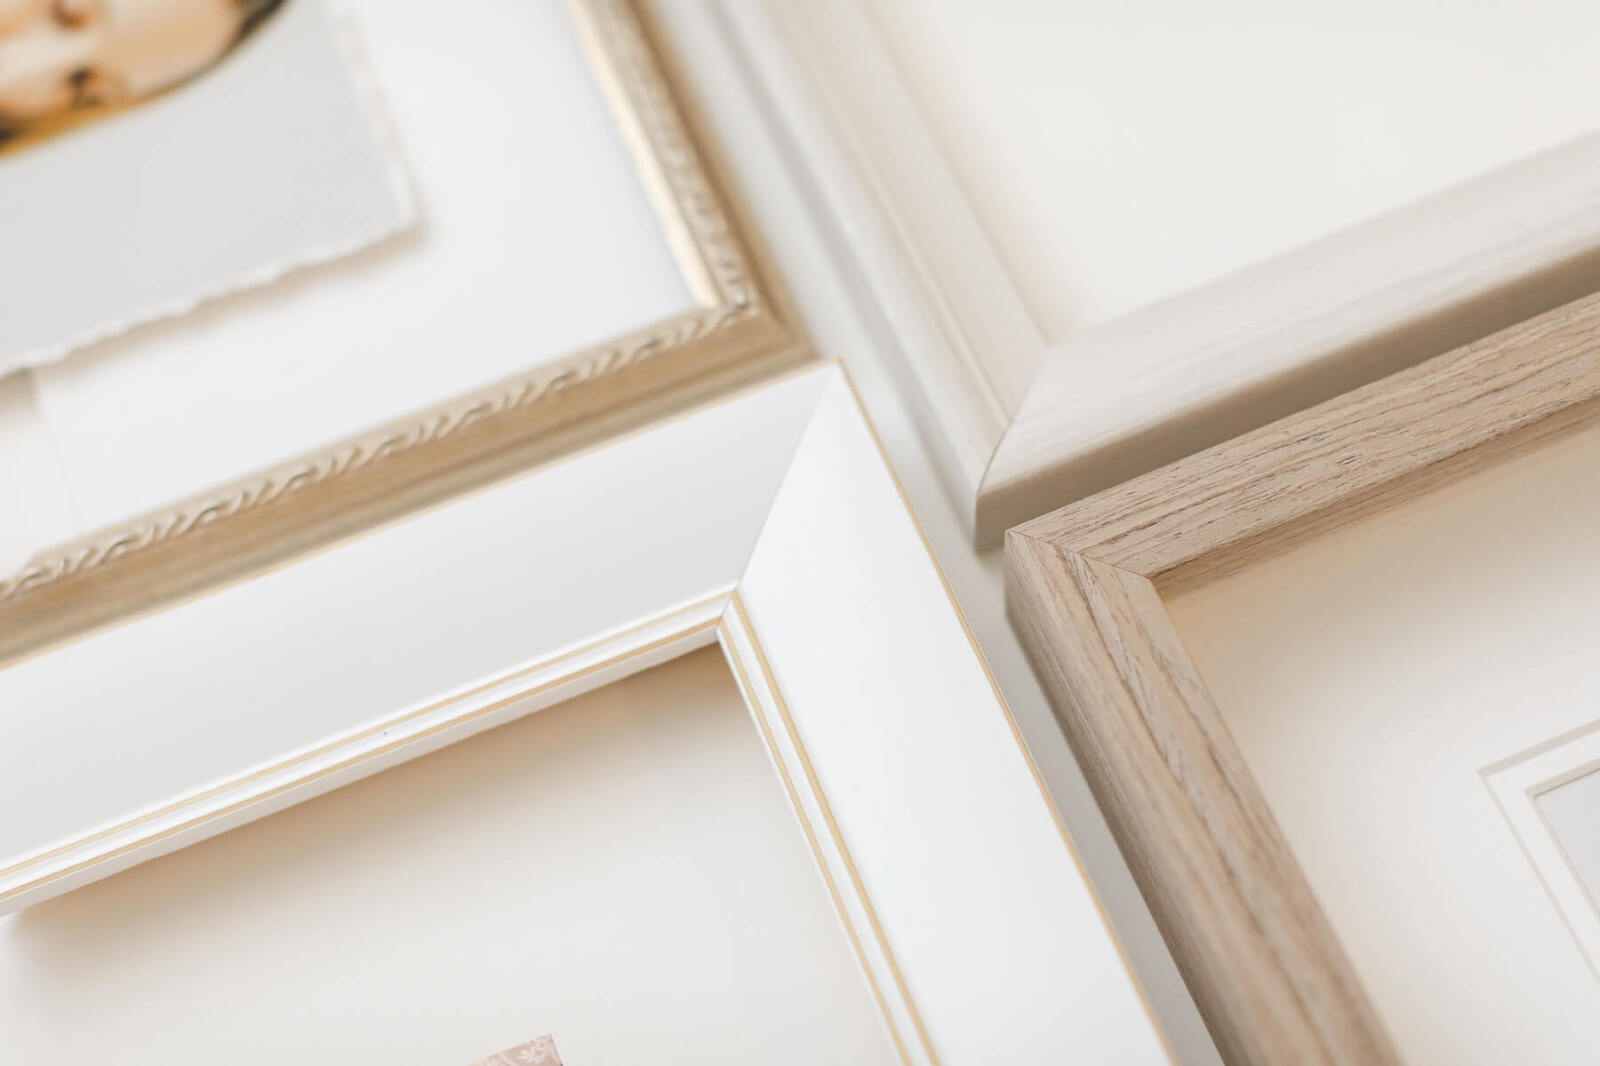 frame samples to choose from for your omaha newborn photography session